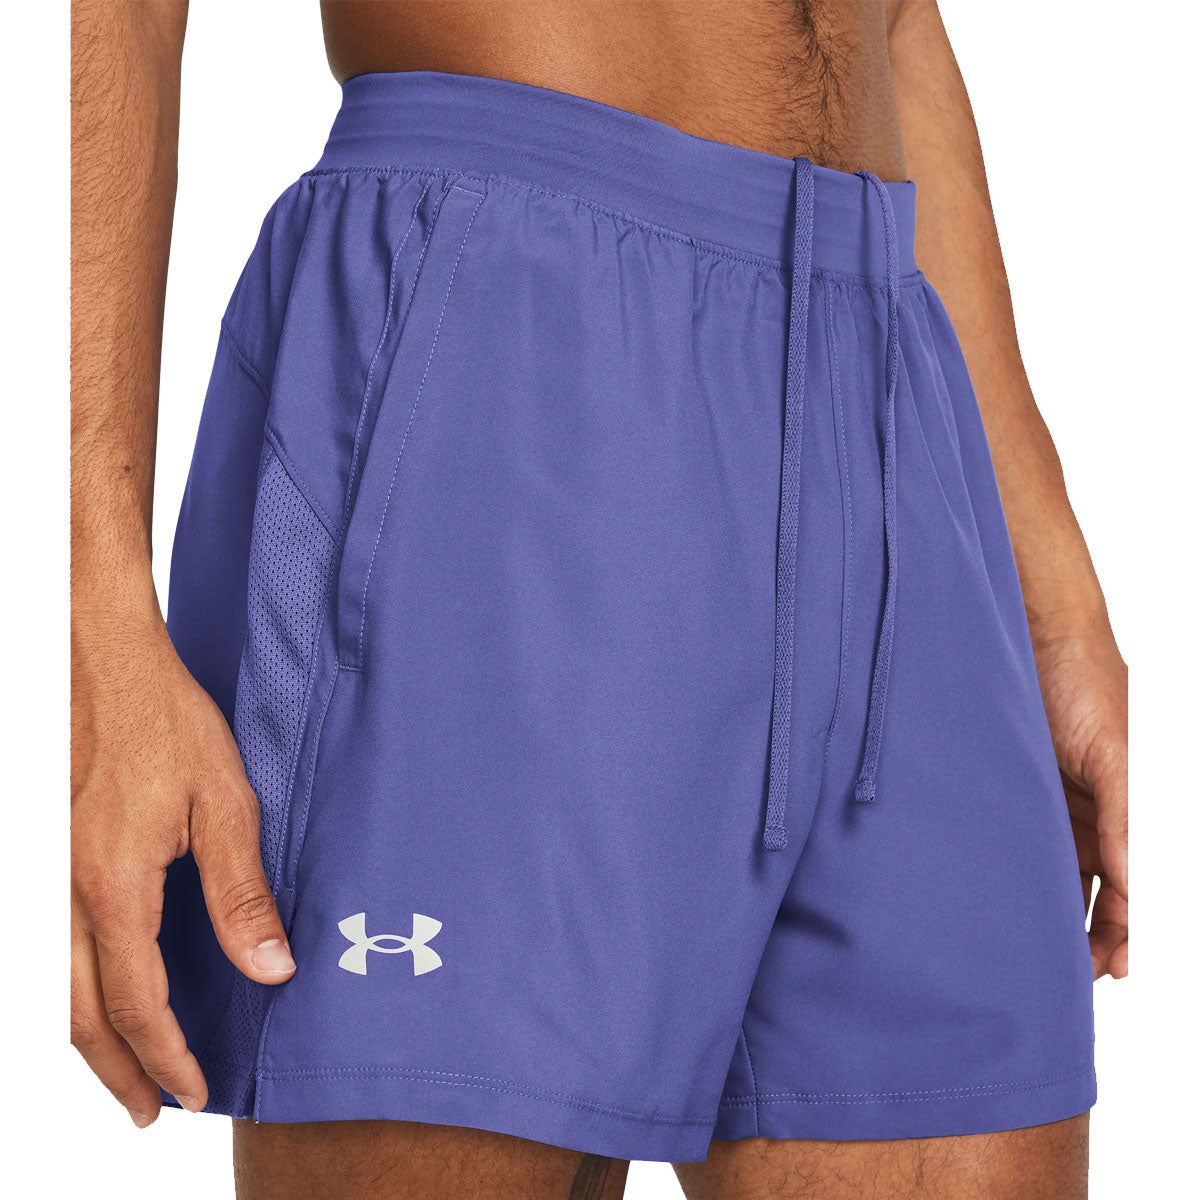 Under Armour Launch 5 inch Running Shorts - Mens - Starlight/Reflective